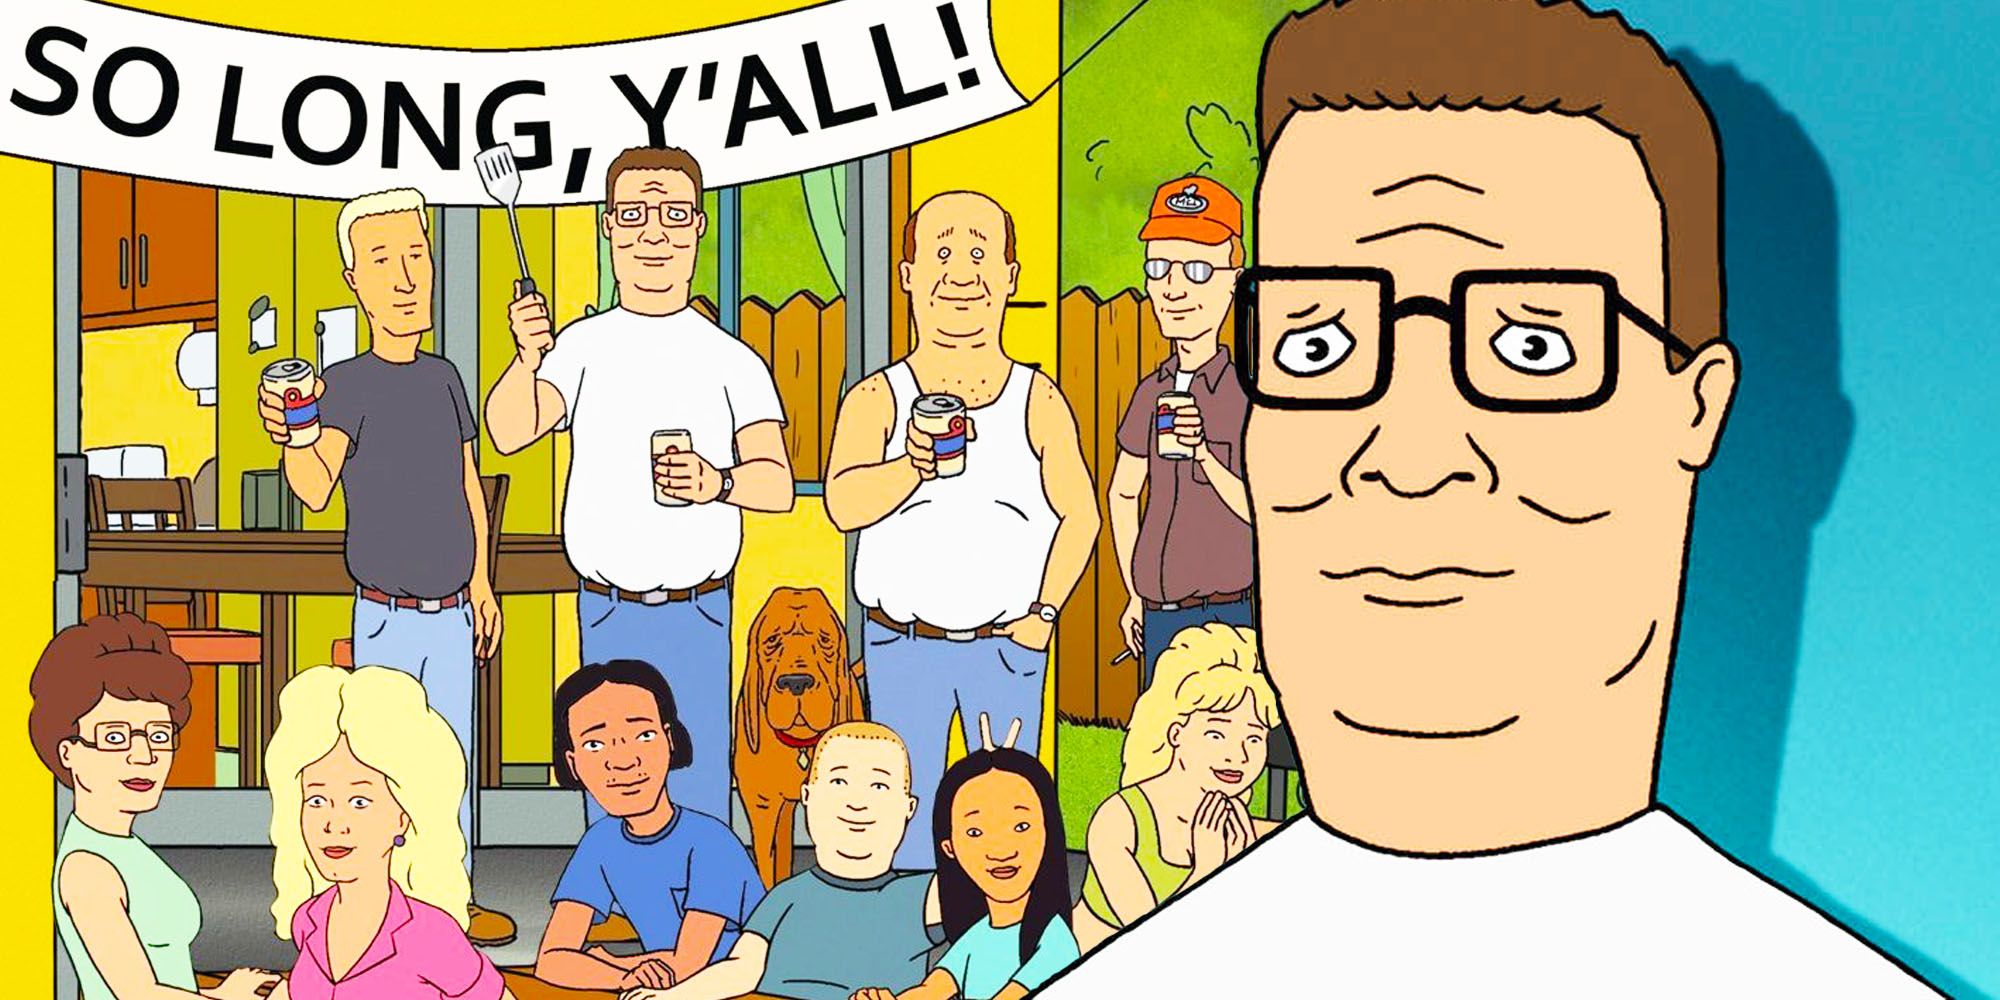 Bobby Hill 10 years later - King of the Hill Reboot concept. - Imgur